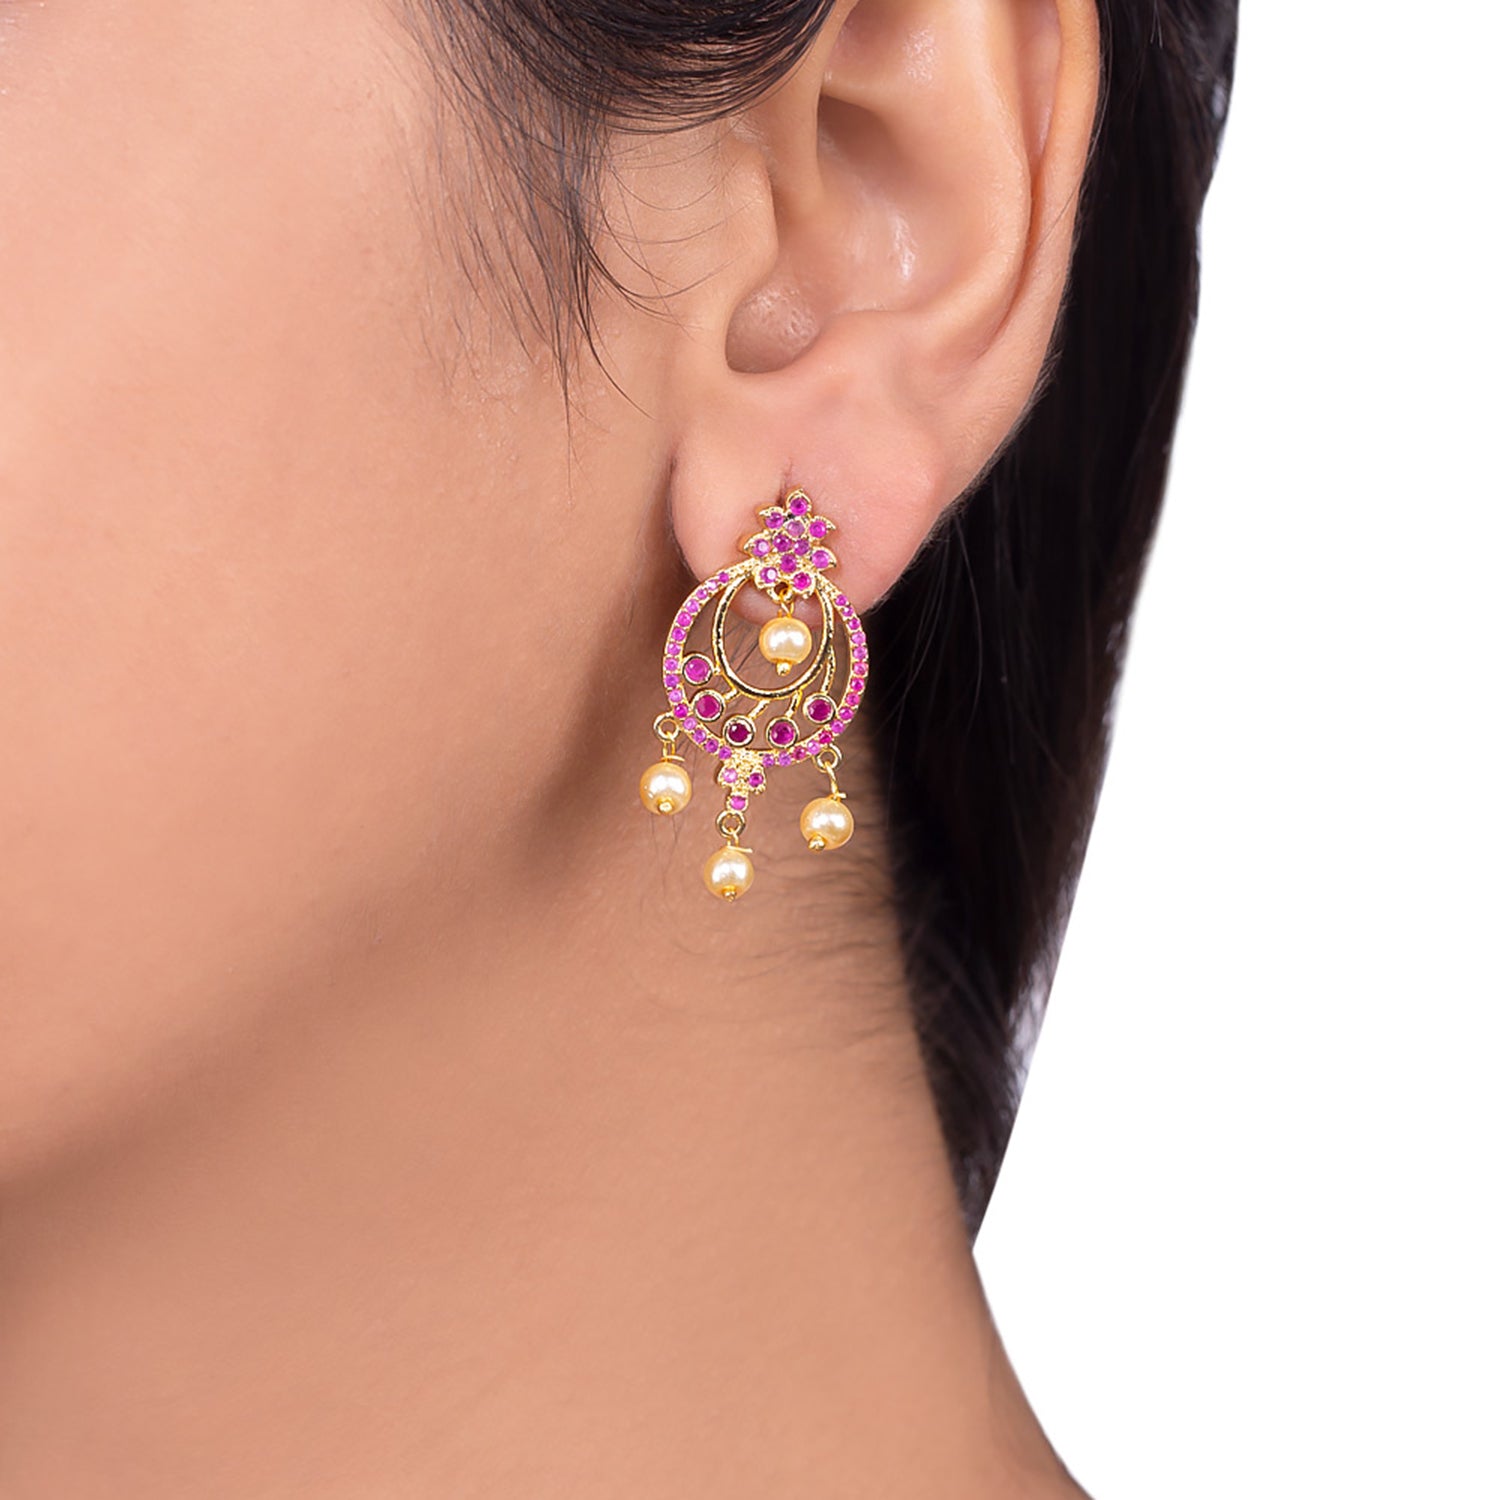 Coloured CZ Gems and Faux Pearls Earrings